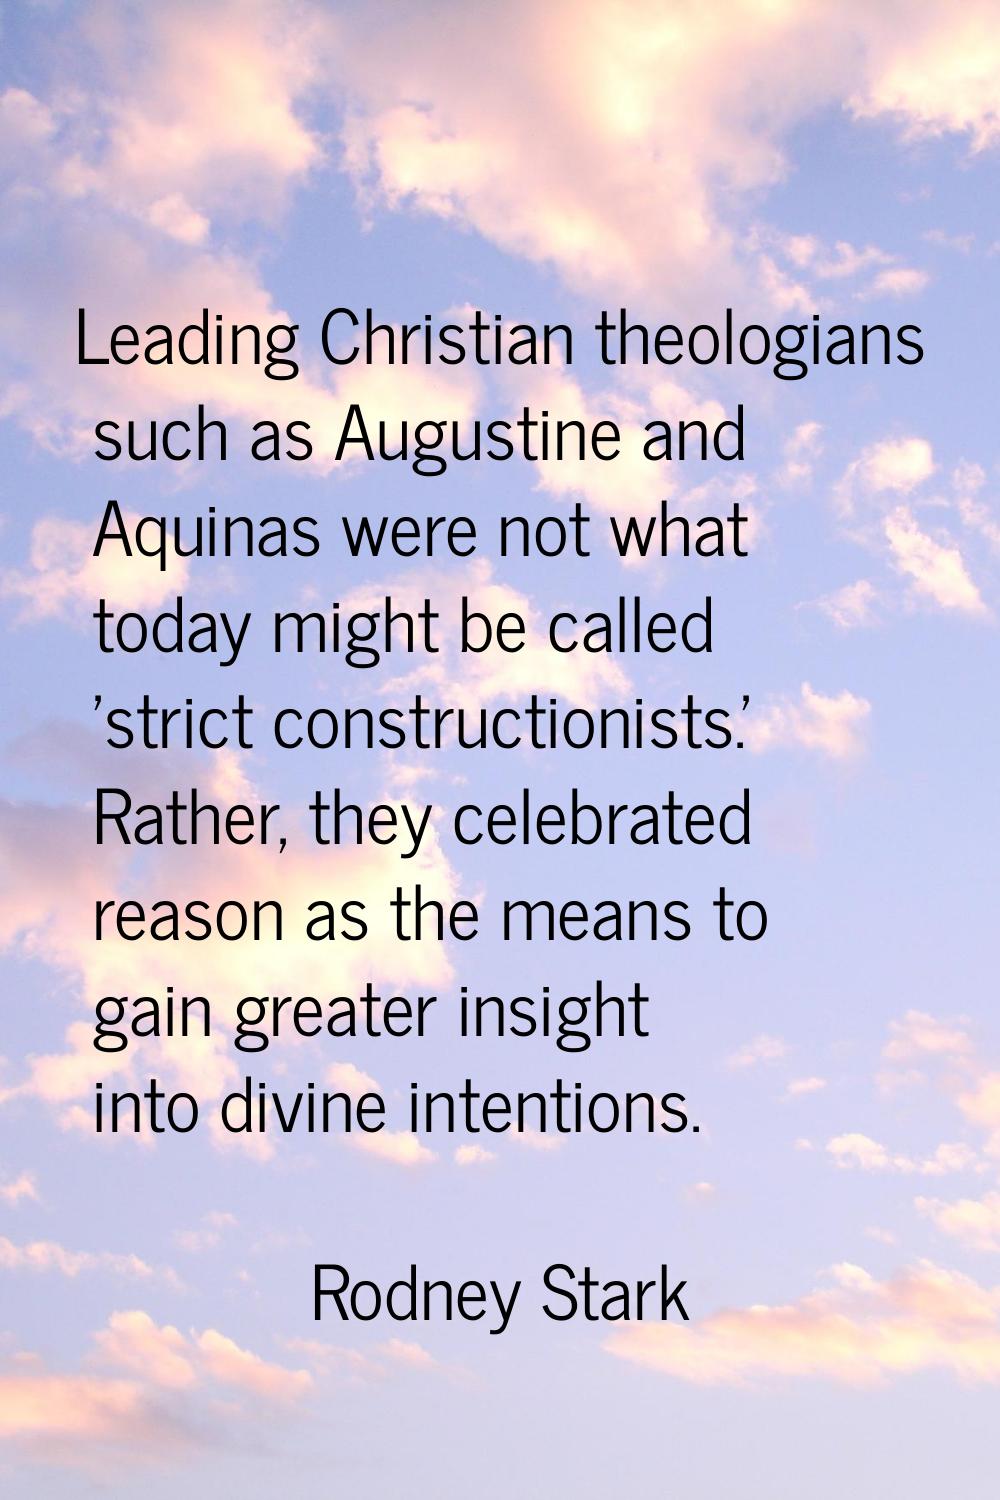 Leading Christian theologians such as Augustine and Aquinas were not what today might be called 'st